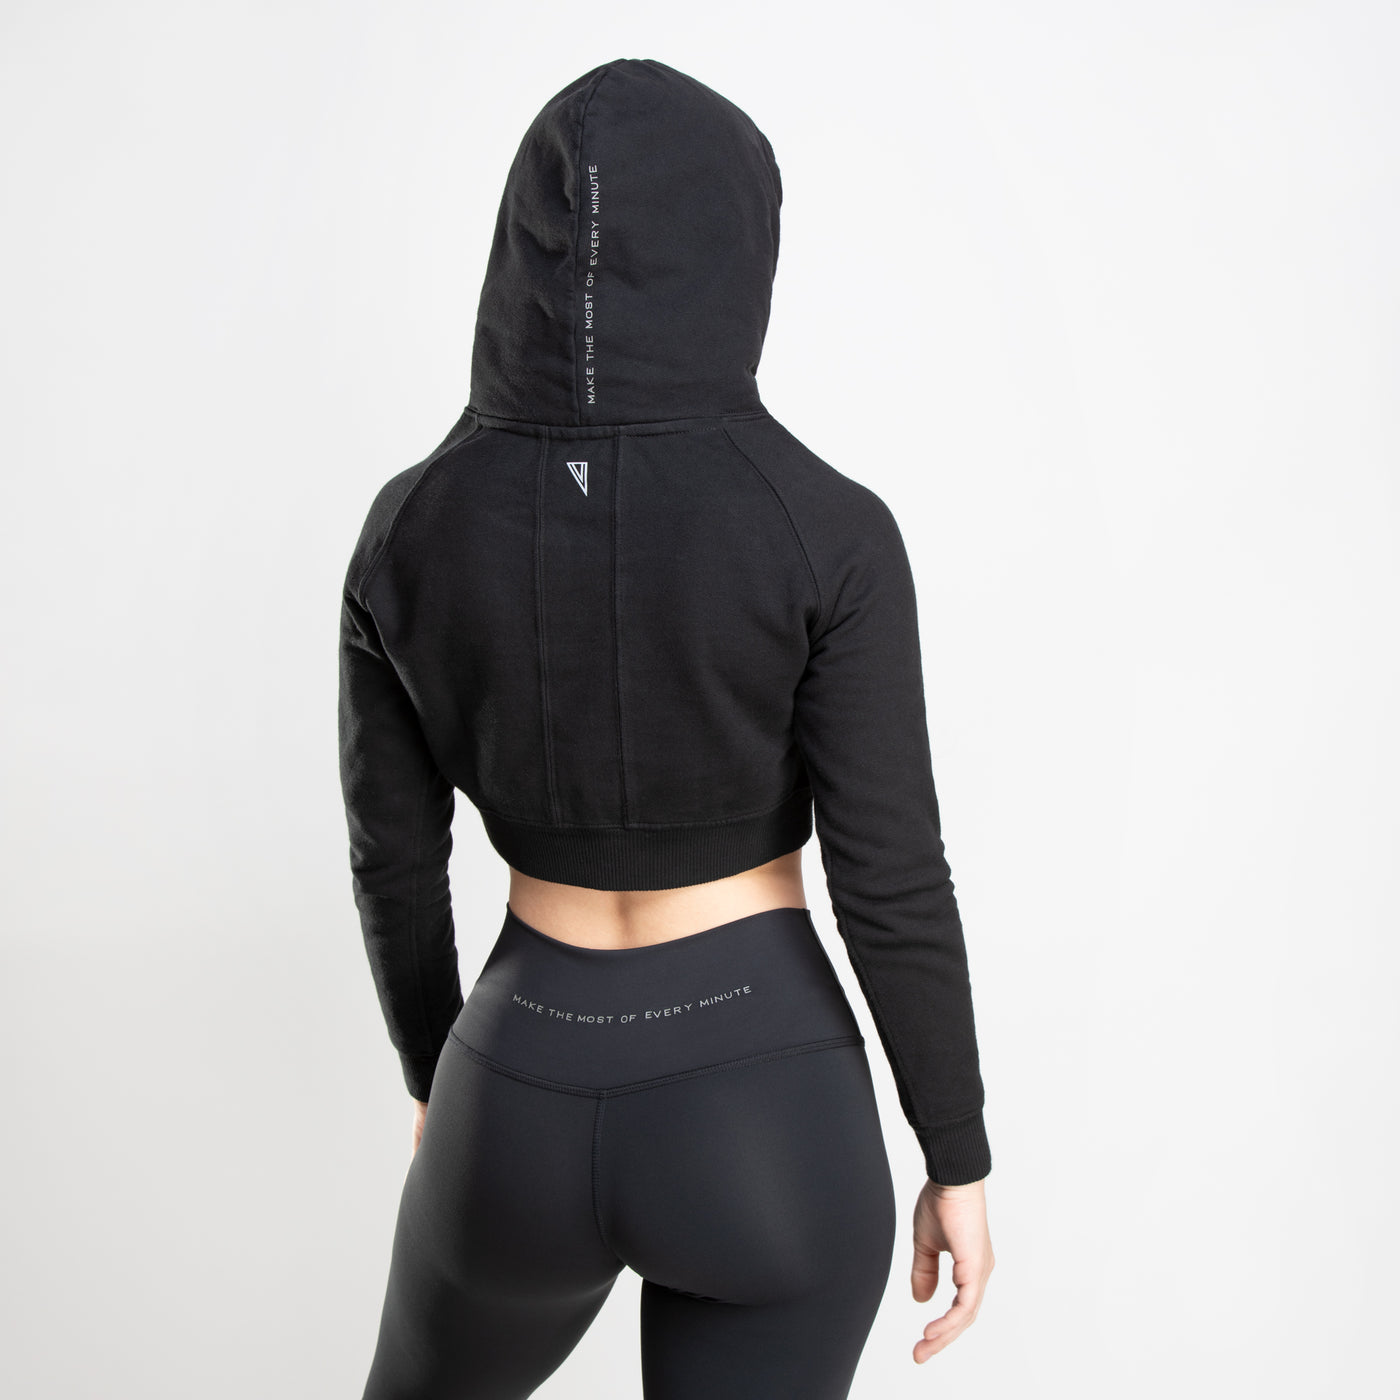 NZG NonZero Gravity Antimicrobial Odor & Sweat Proof UV 50+  ZinTex Cropped Workout Hoodie for women  